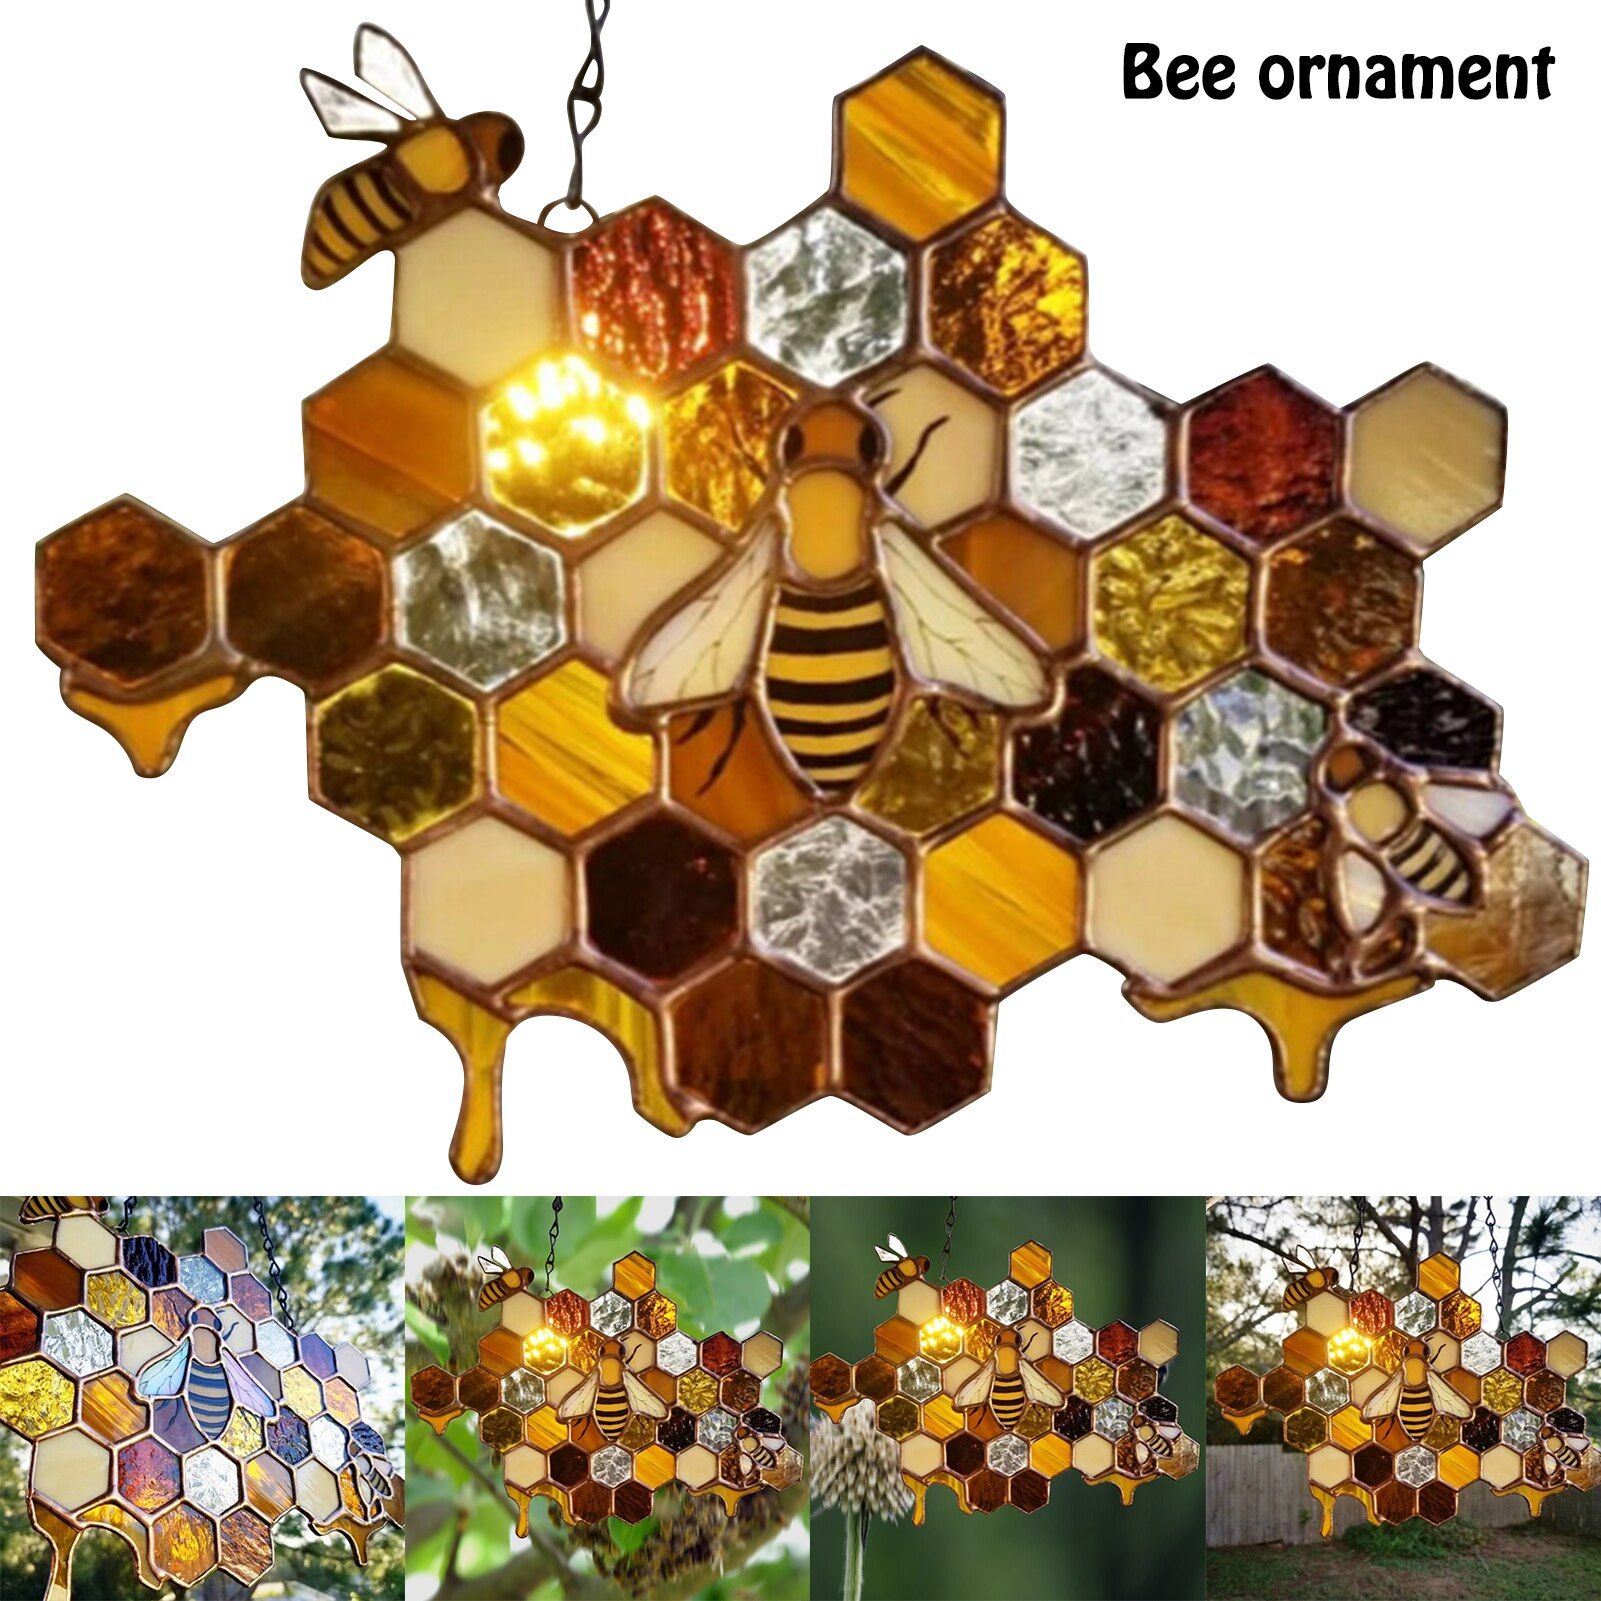 Queen & Bee Protect Honey Suncatcher Honey Bee Mosaic Handmade Home Decoration  Wall Art Hfing   – Aliexpress Mobile Within Bee Ornament Wall Art (View 2 of 15)